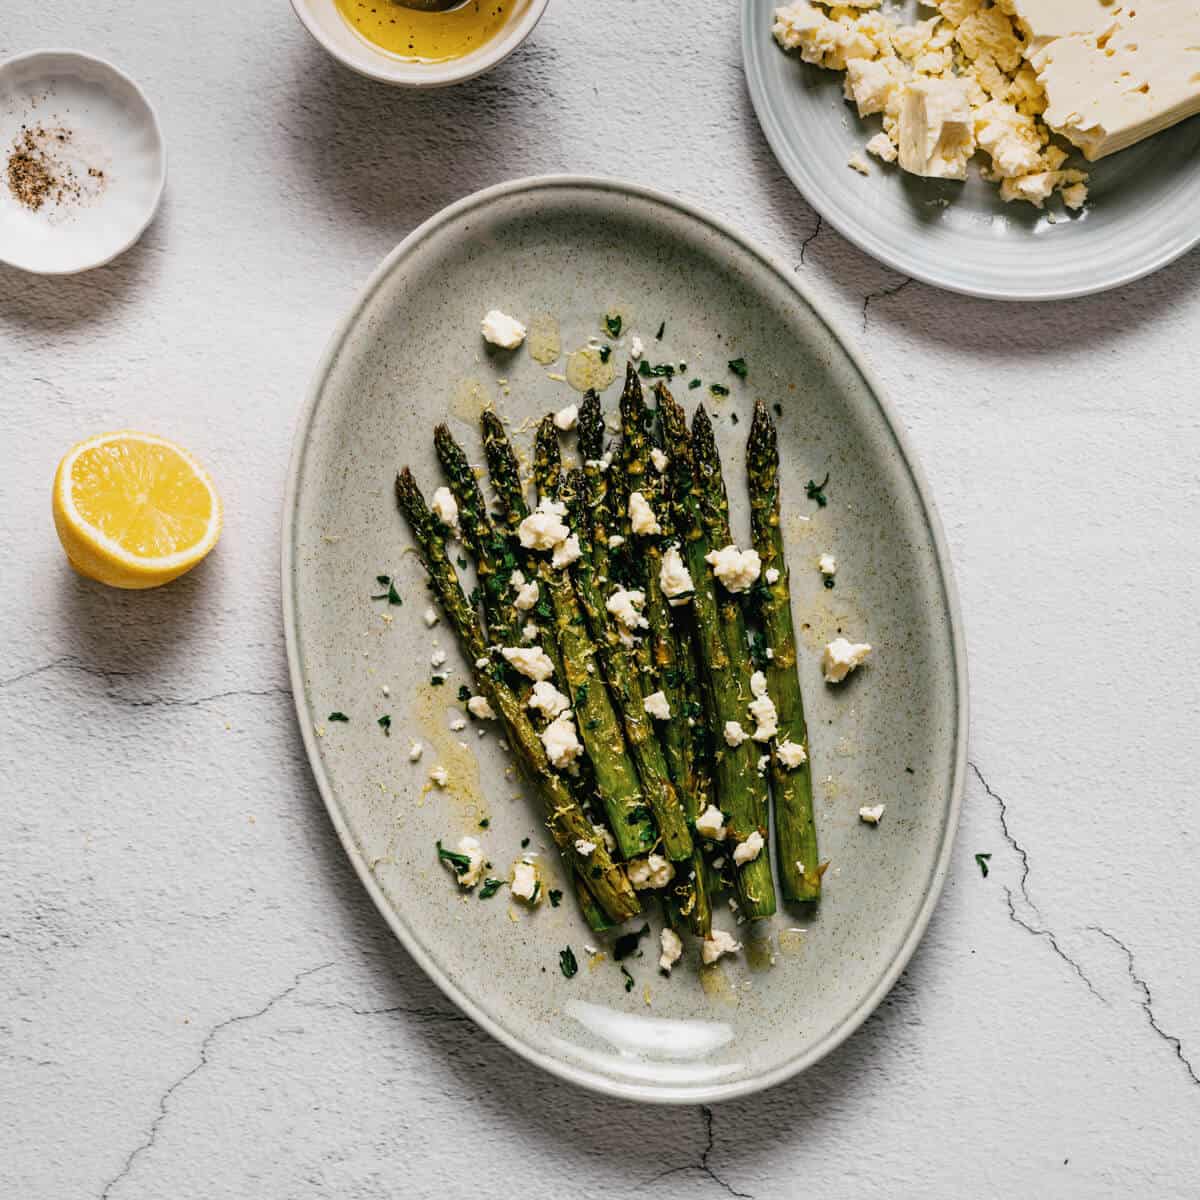 a platter of asparagus topped with crumbled feta cheese.